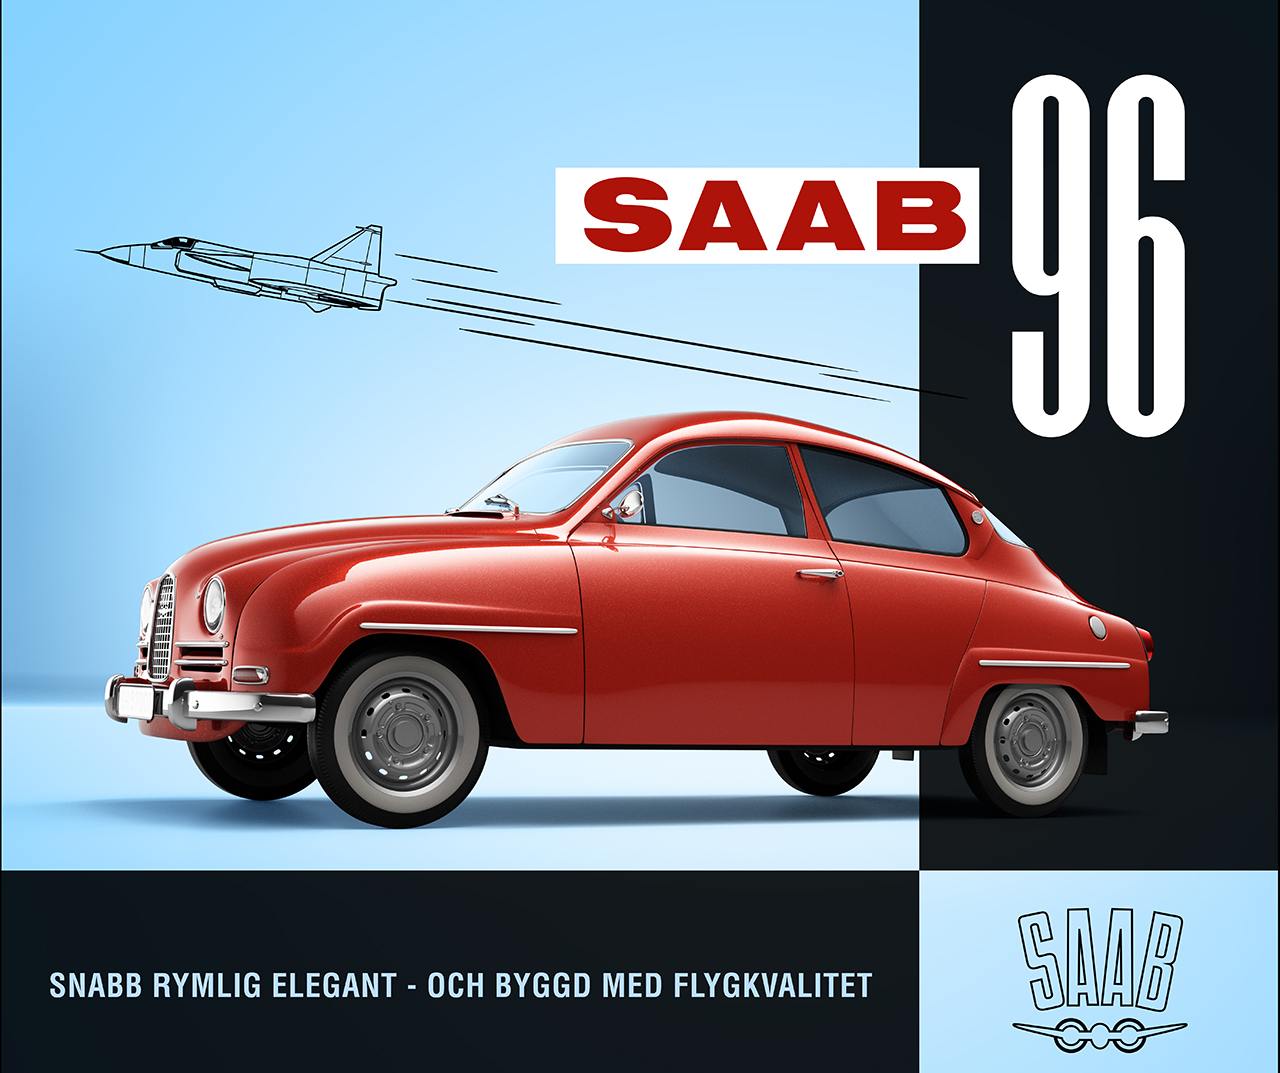 SAAB 96 1968 v4 box design retopo 3d model of red car from the 60